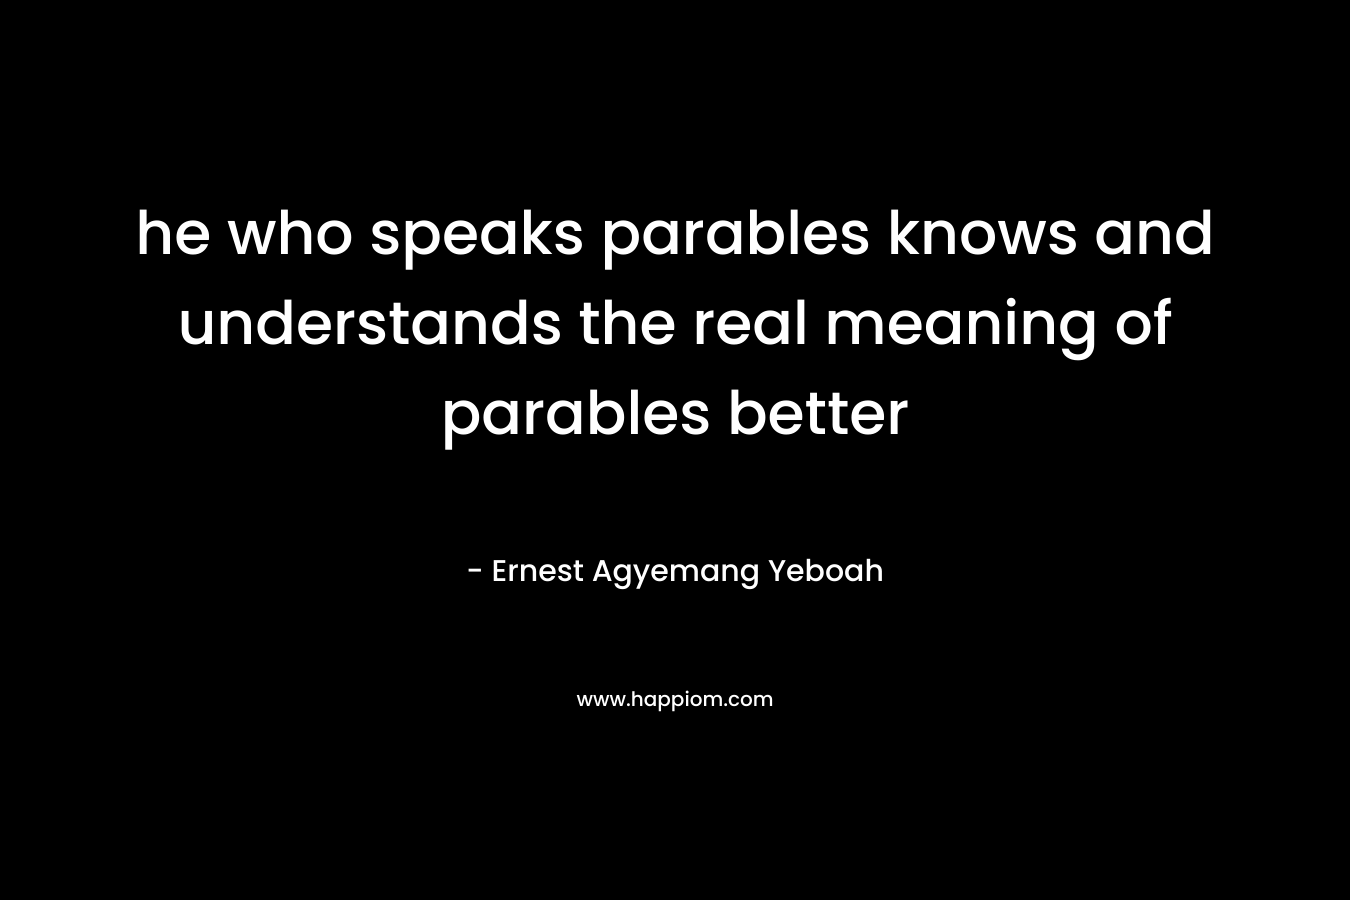 he who speaks parables knows and understands the real meaning of parables better – Ernest Agyemang Yeboah